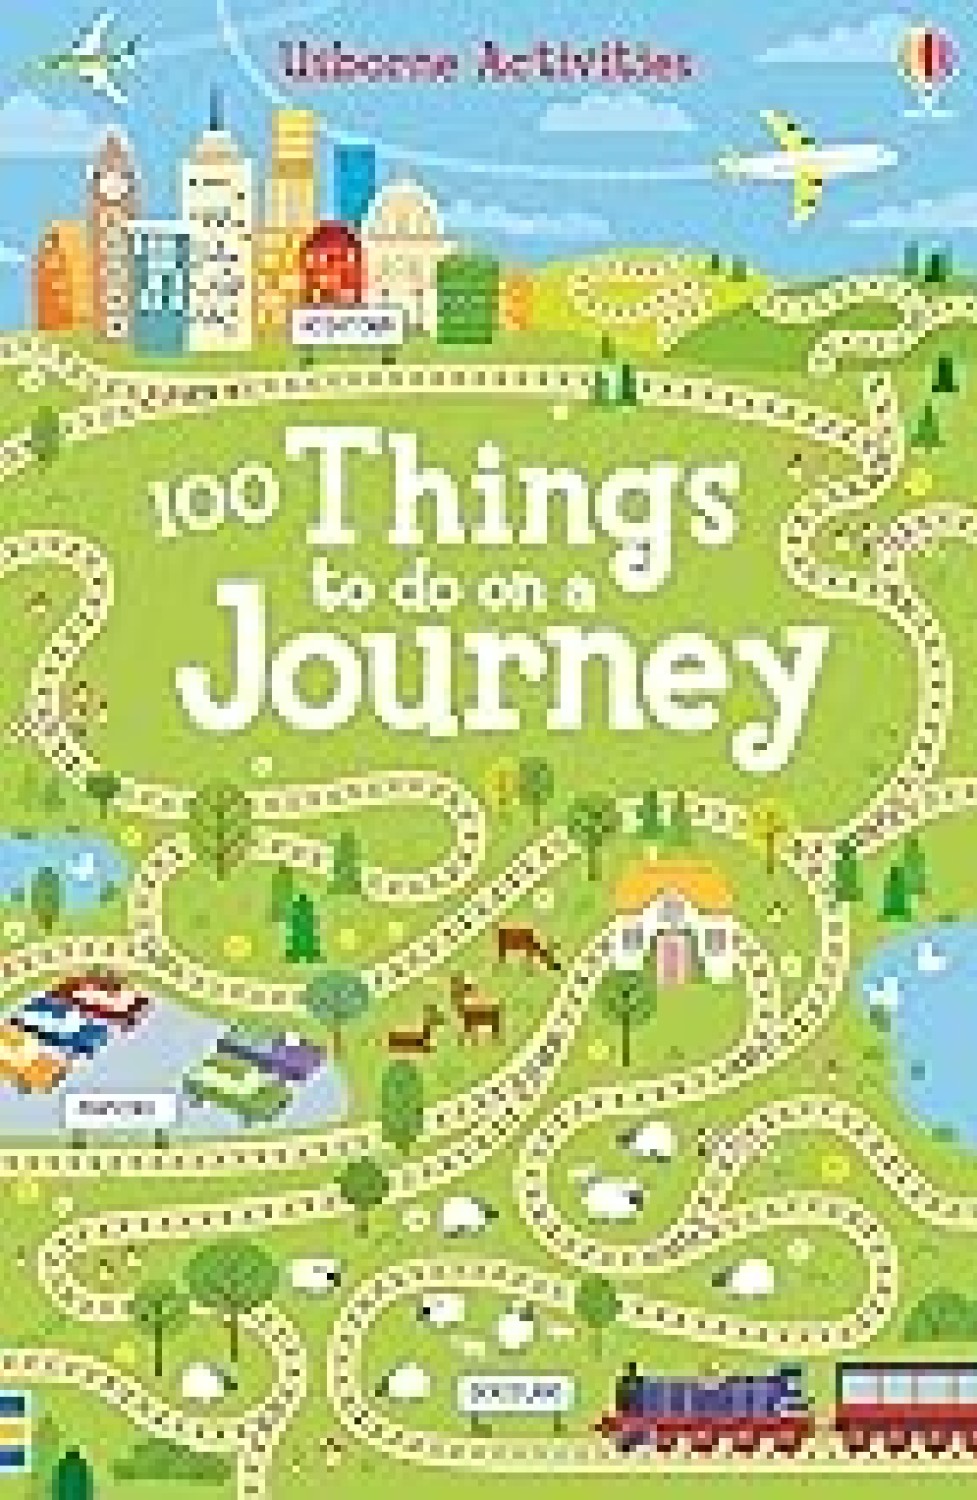 100 THINGS TO DO ON A JOURNEY